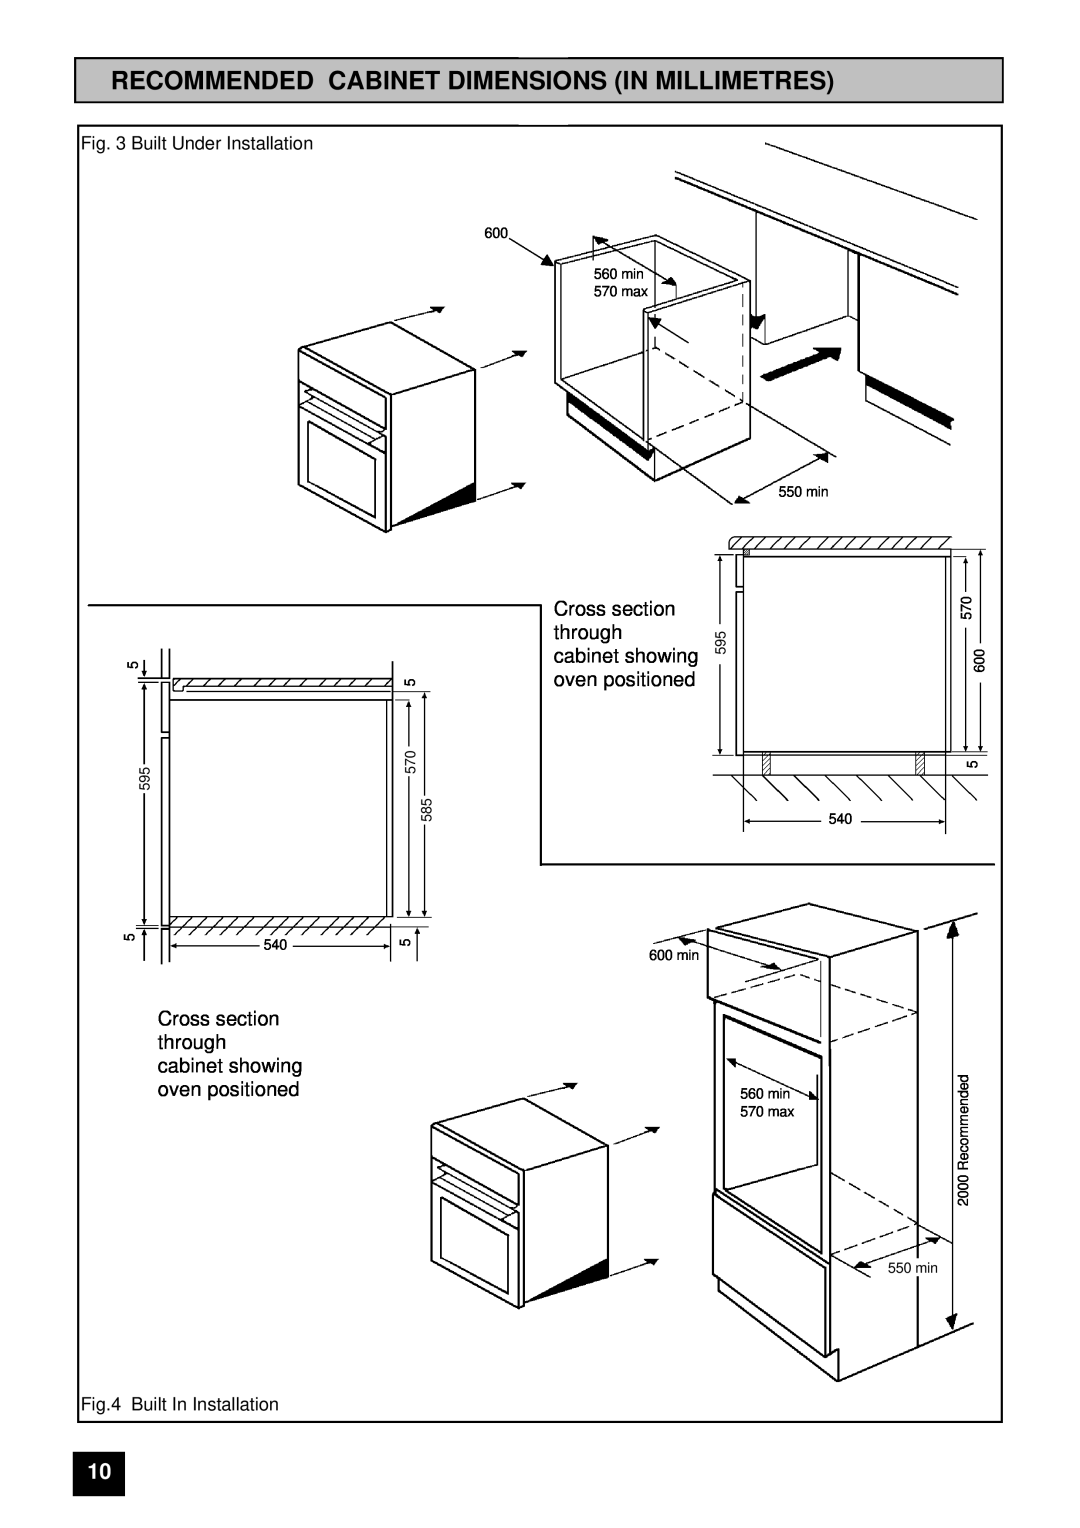 Tricity Bendix BS 600 Recommended Cabinet Dimensions In Millimetres, Cross section, through, cabinet showing 